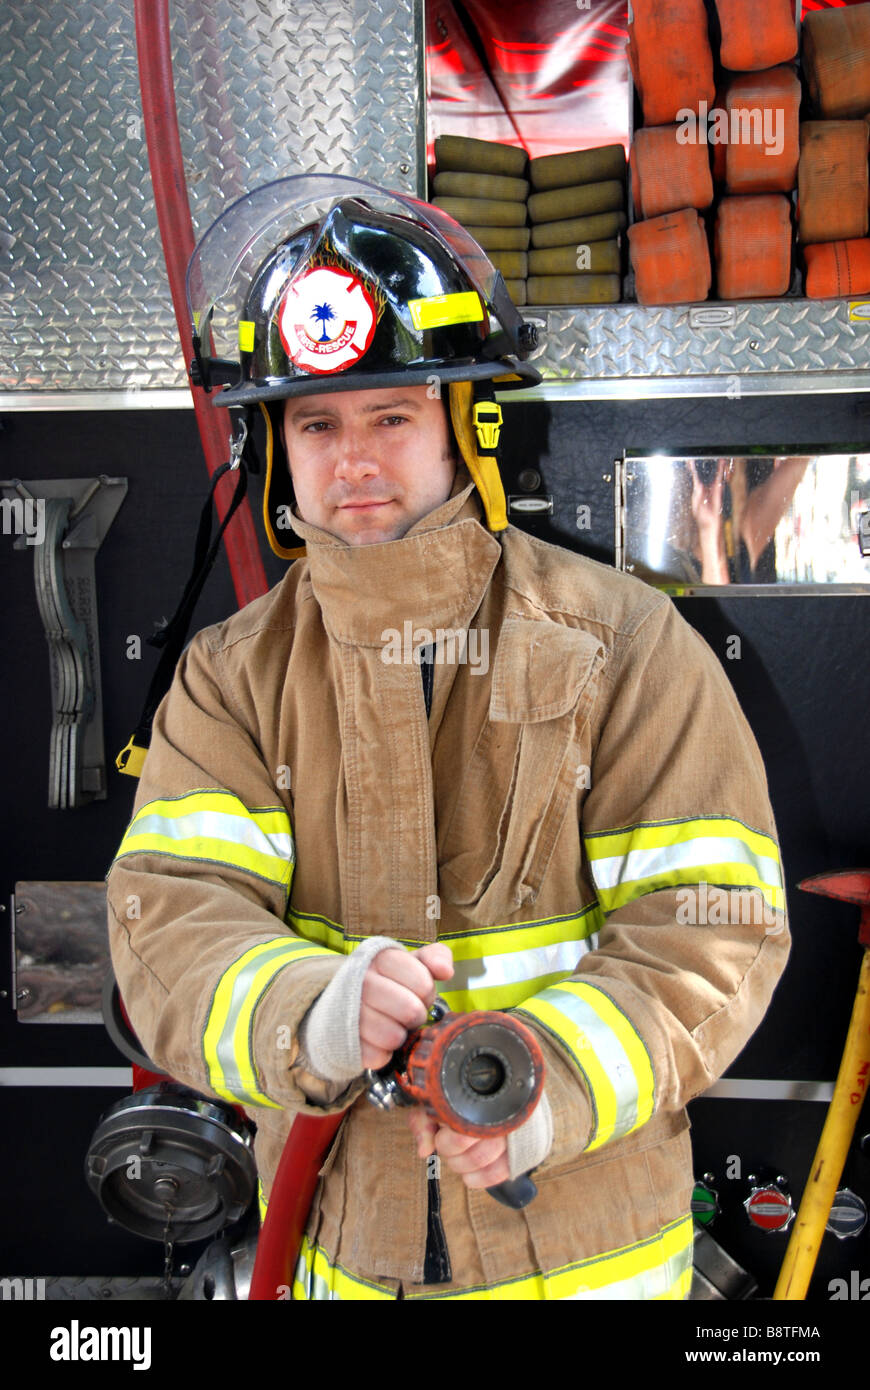 Male Firefighter holding fire hose in front of fire truck wearing bunker gear and helmet Stock Photo